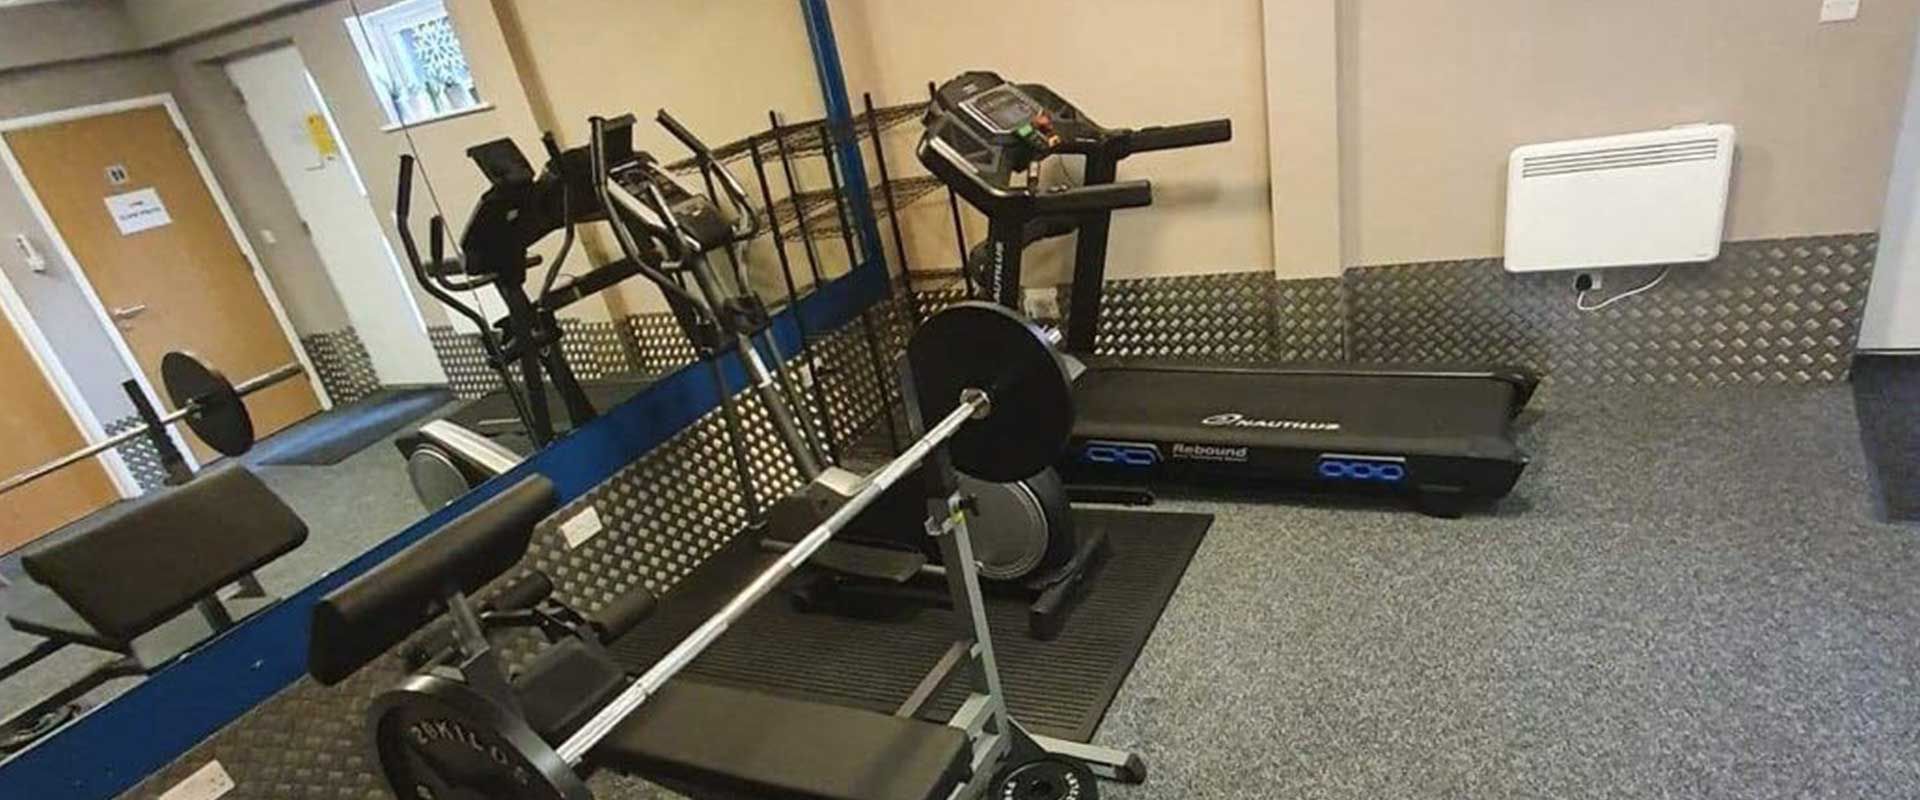 The Student Block Loughborough Accommodation - A free onsite gym with all the equipment you'll need